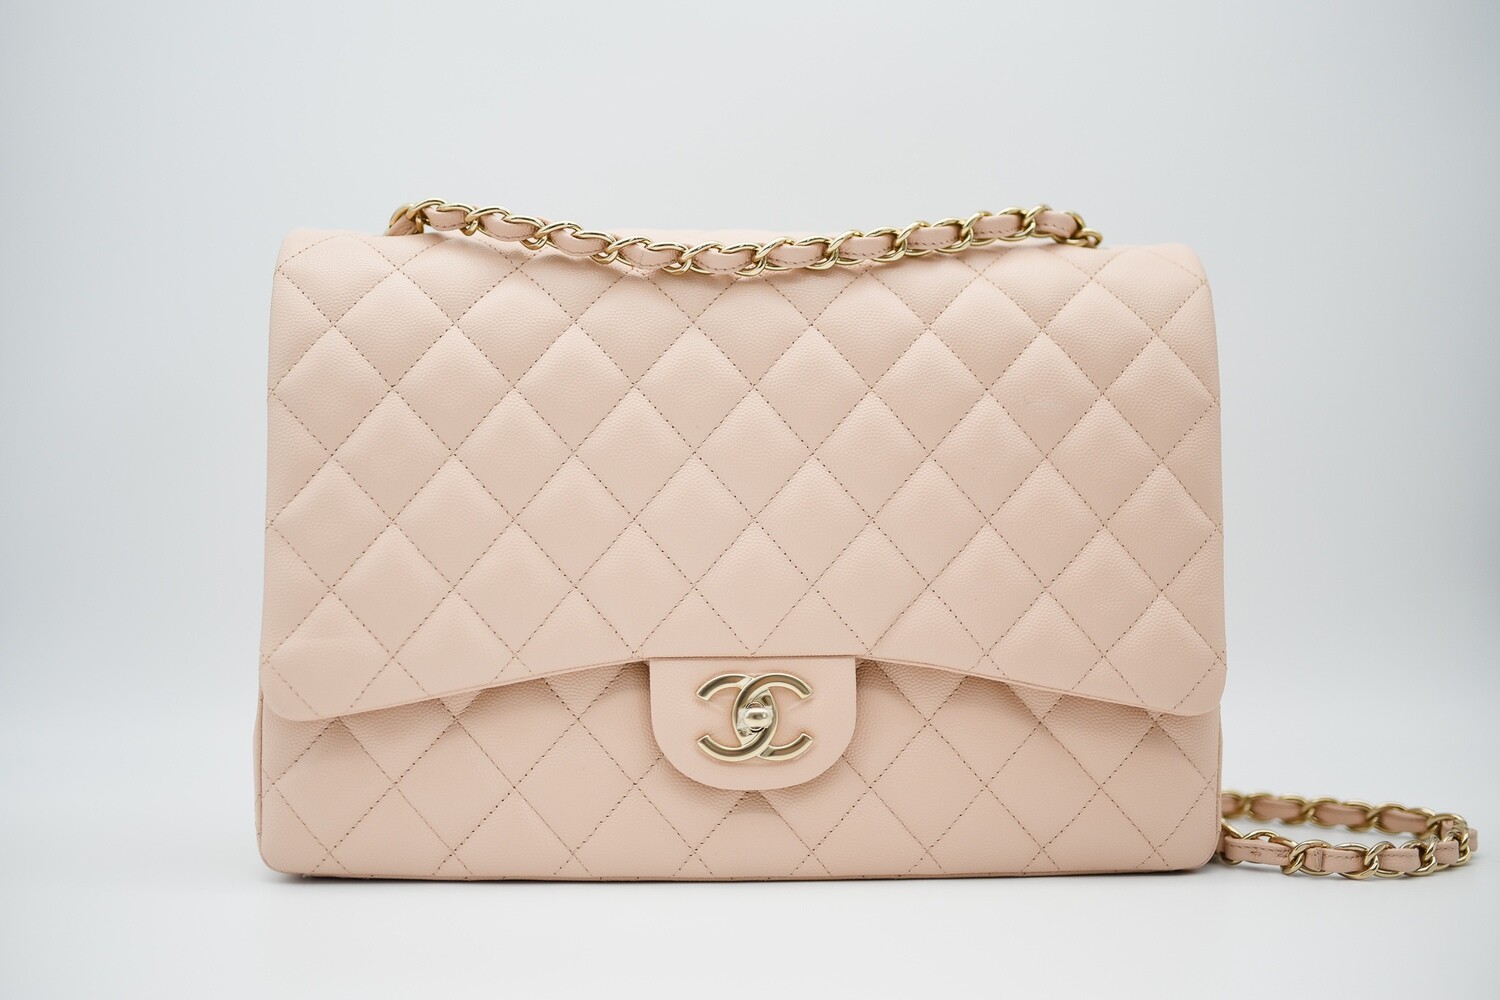 Chanel Classic Maxi Double Flap, 22C Light Beige Caviar with Gold Hardware,  New in Box GA001